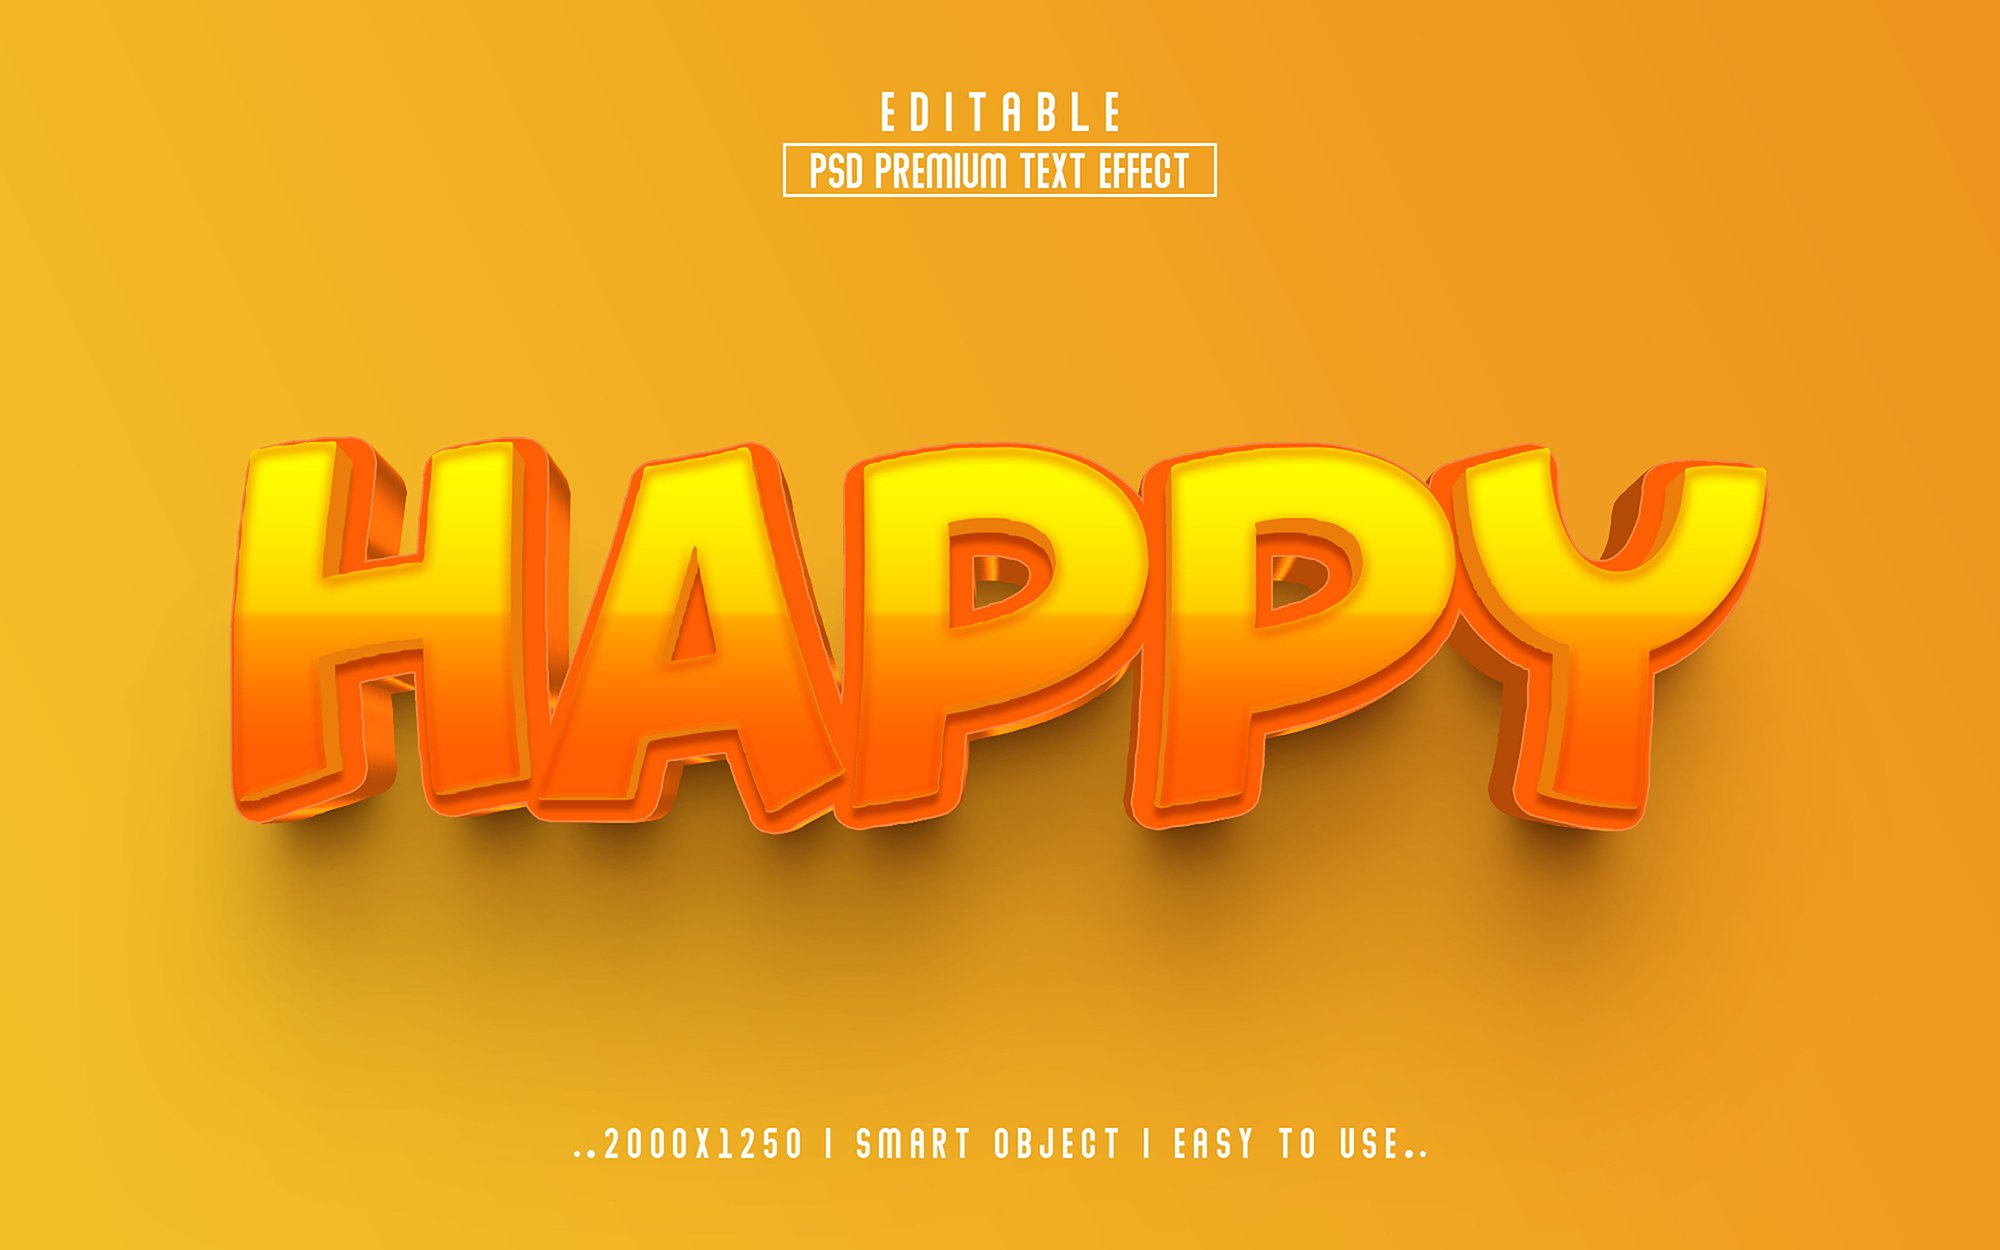 Happy 3D Editable Text Effect stylecover image.